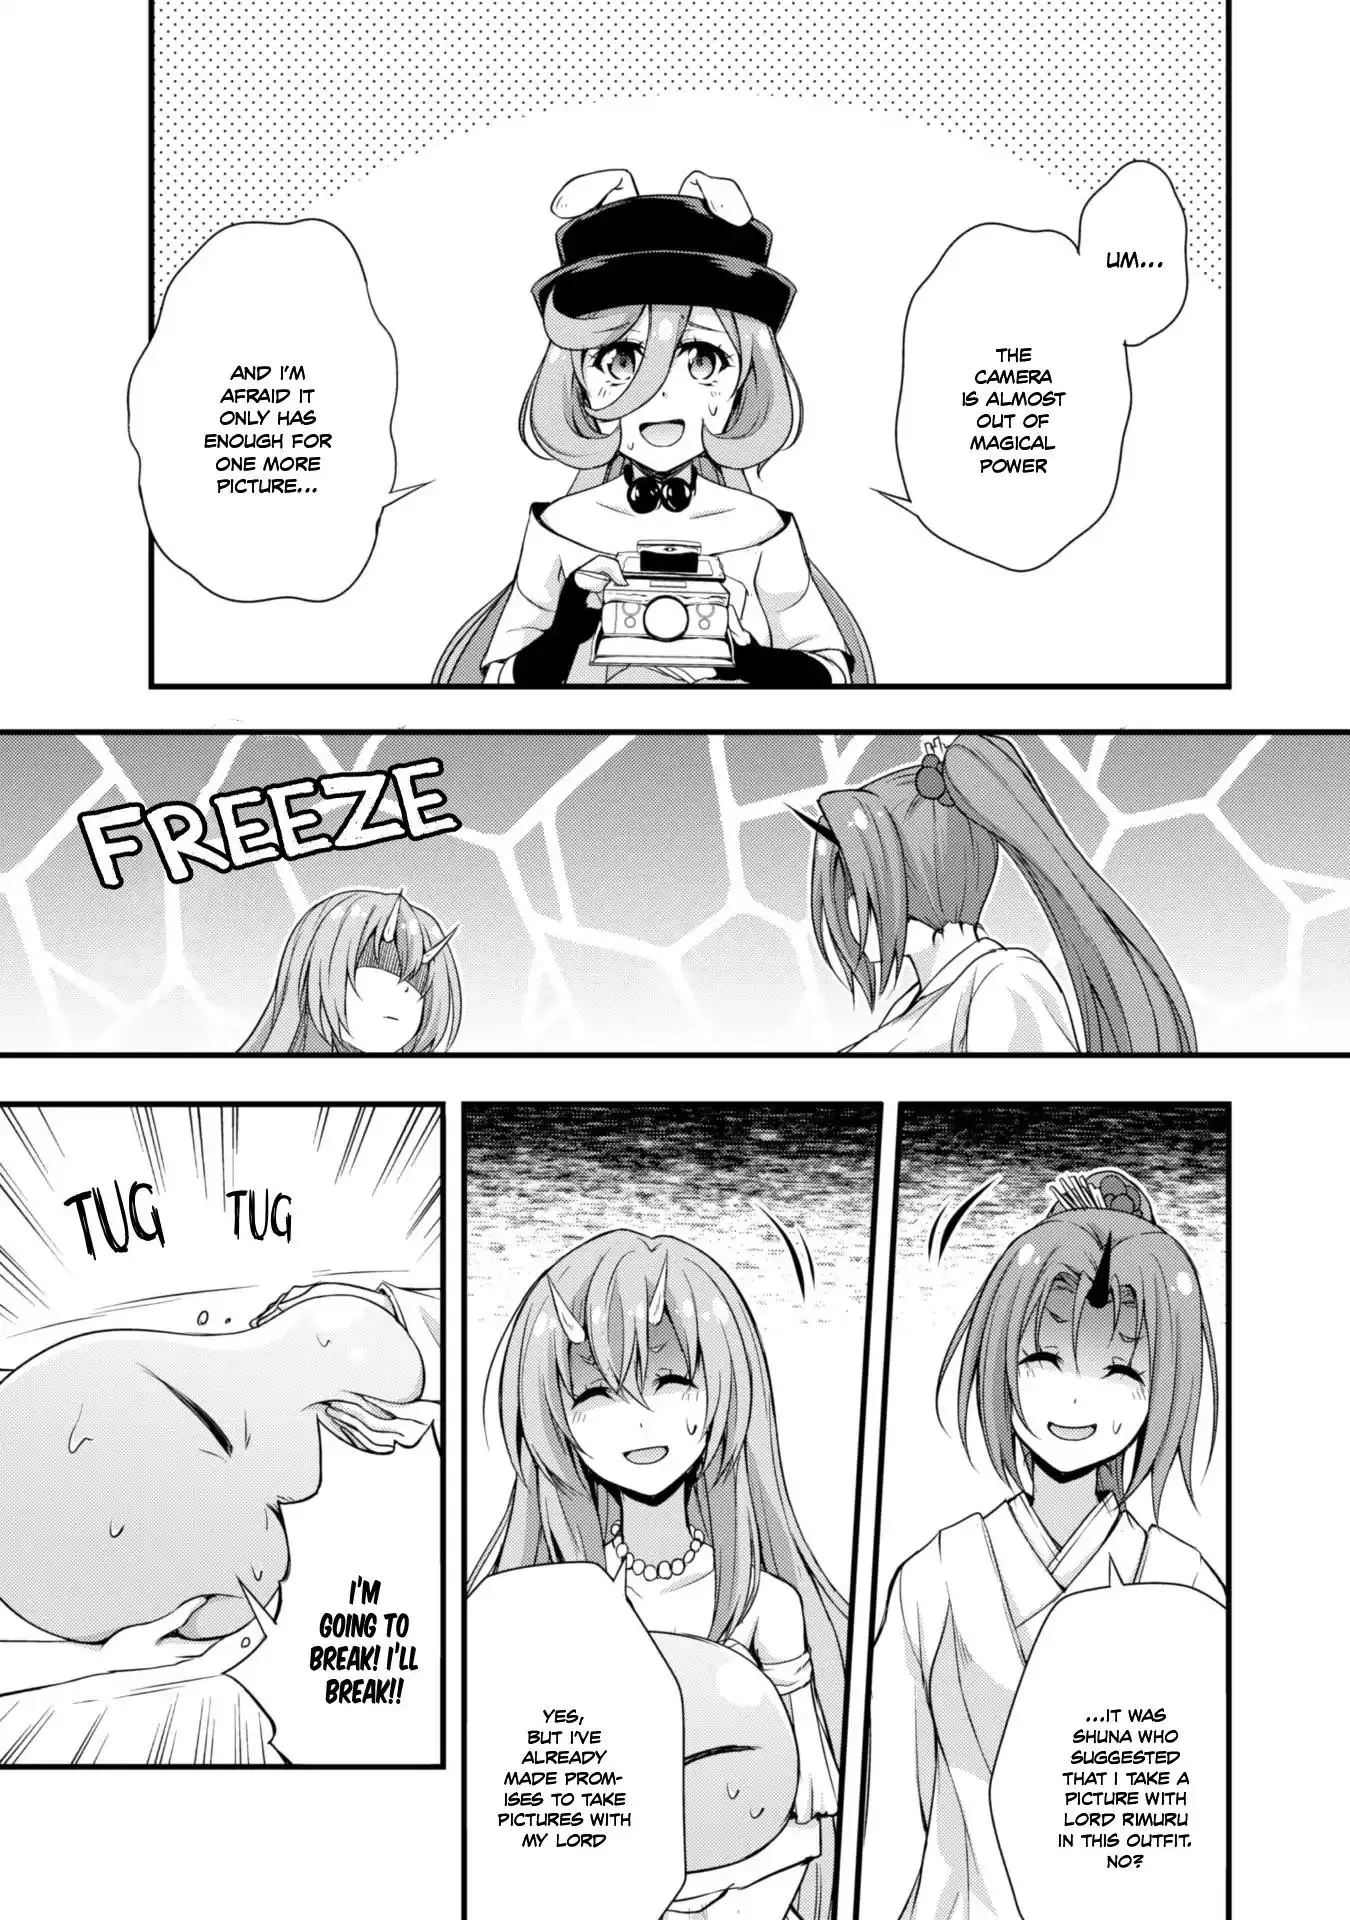 Tensei Shitara Slime Datta Ken: The Ways of Strolling in the Demon Country - 13 page 8